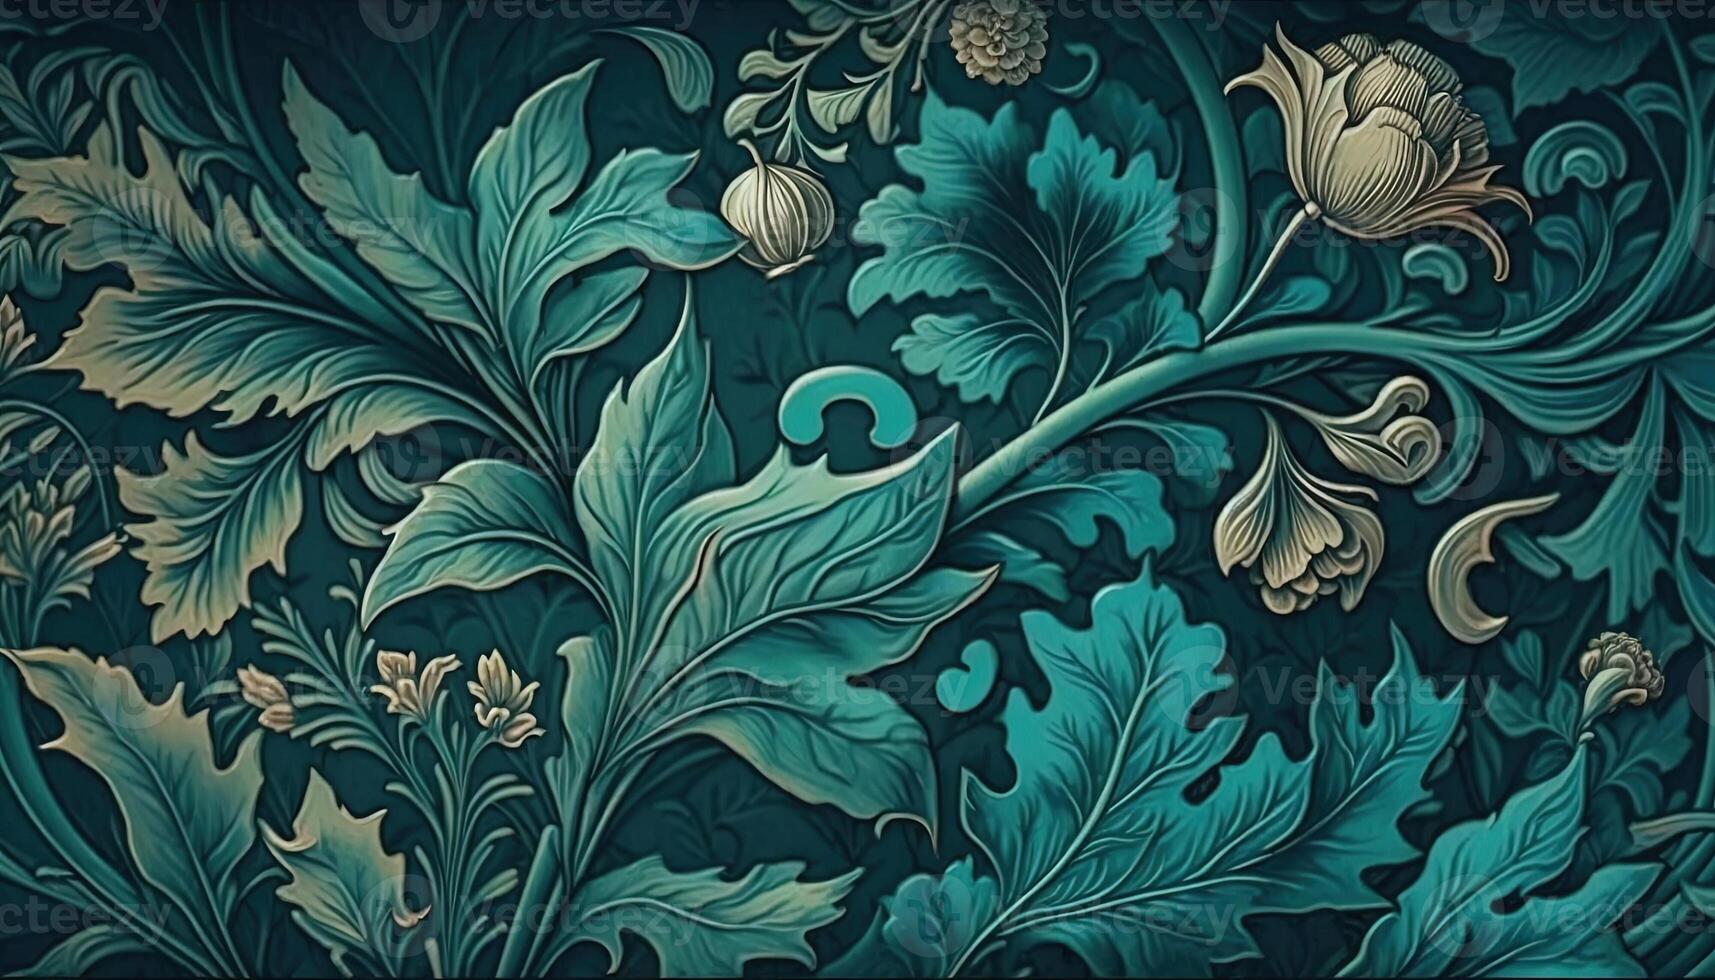 , Floral teal, green blue pattern. William Morris inspired natural plants and flowers background, vintage illustration. Foliage ornament. photo